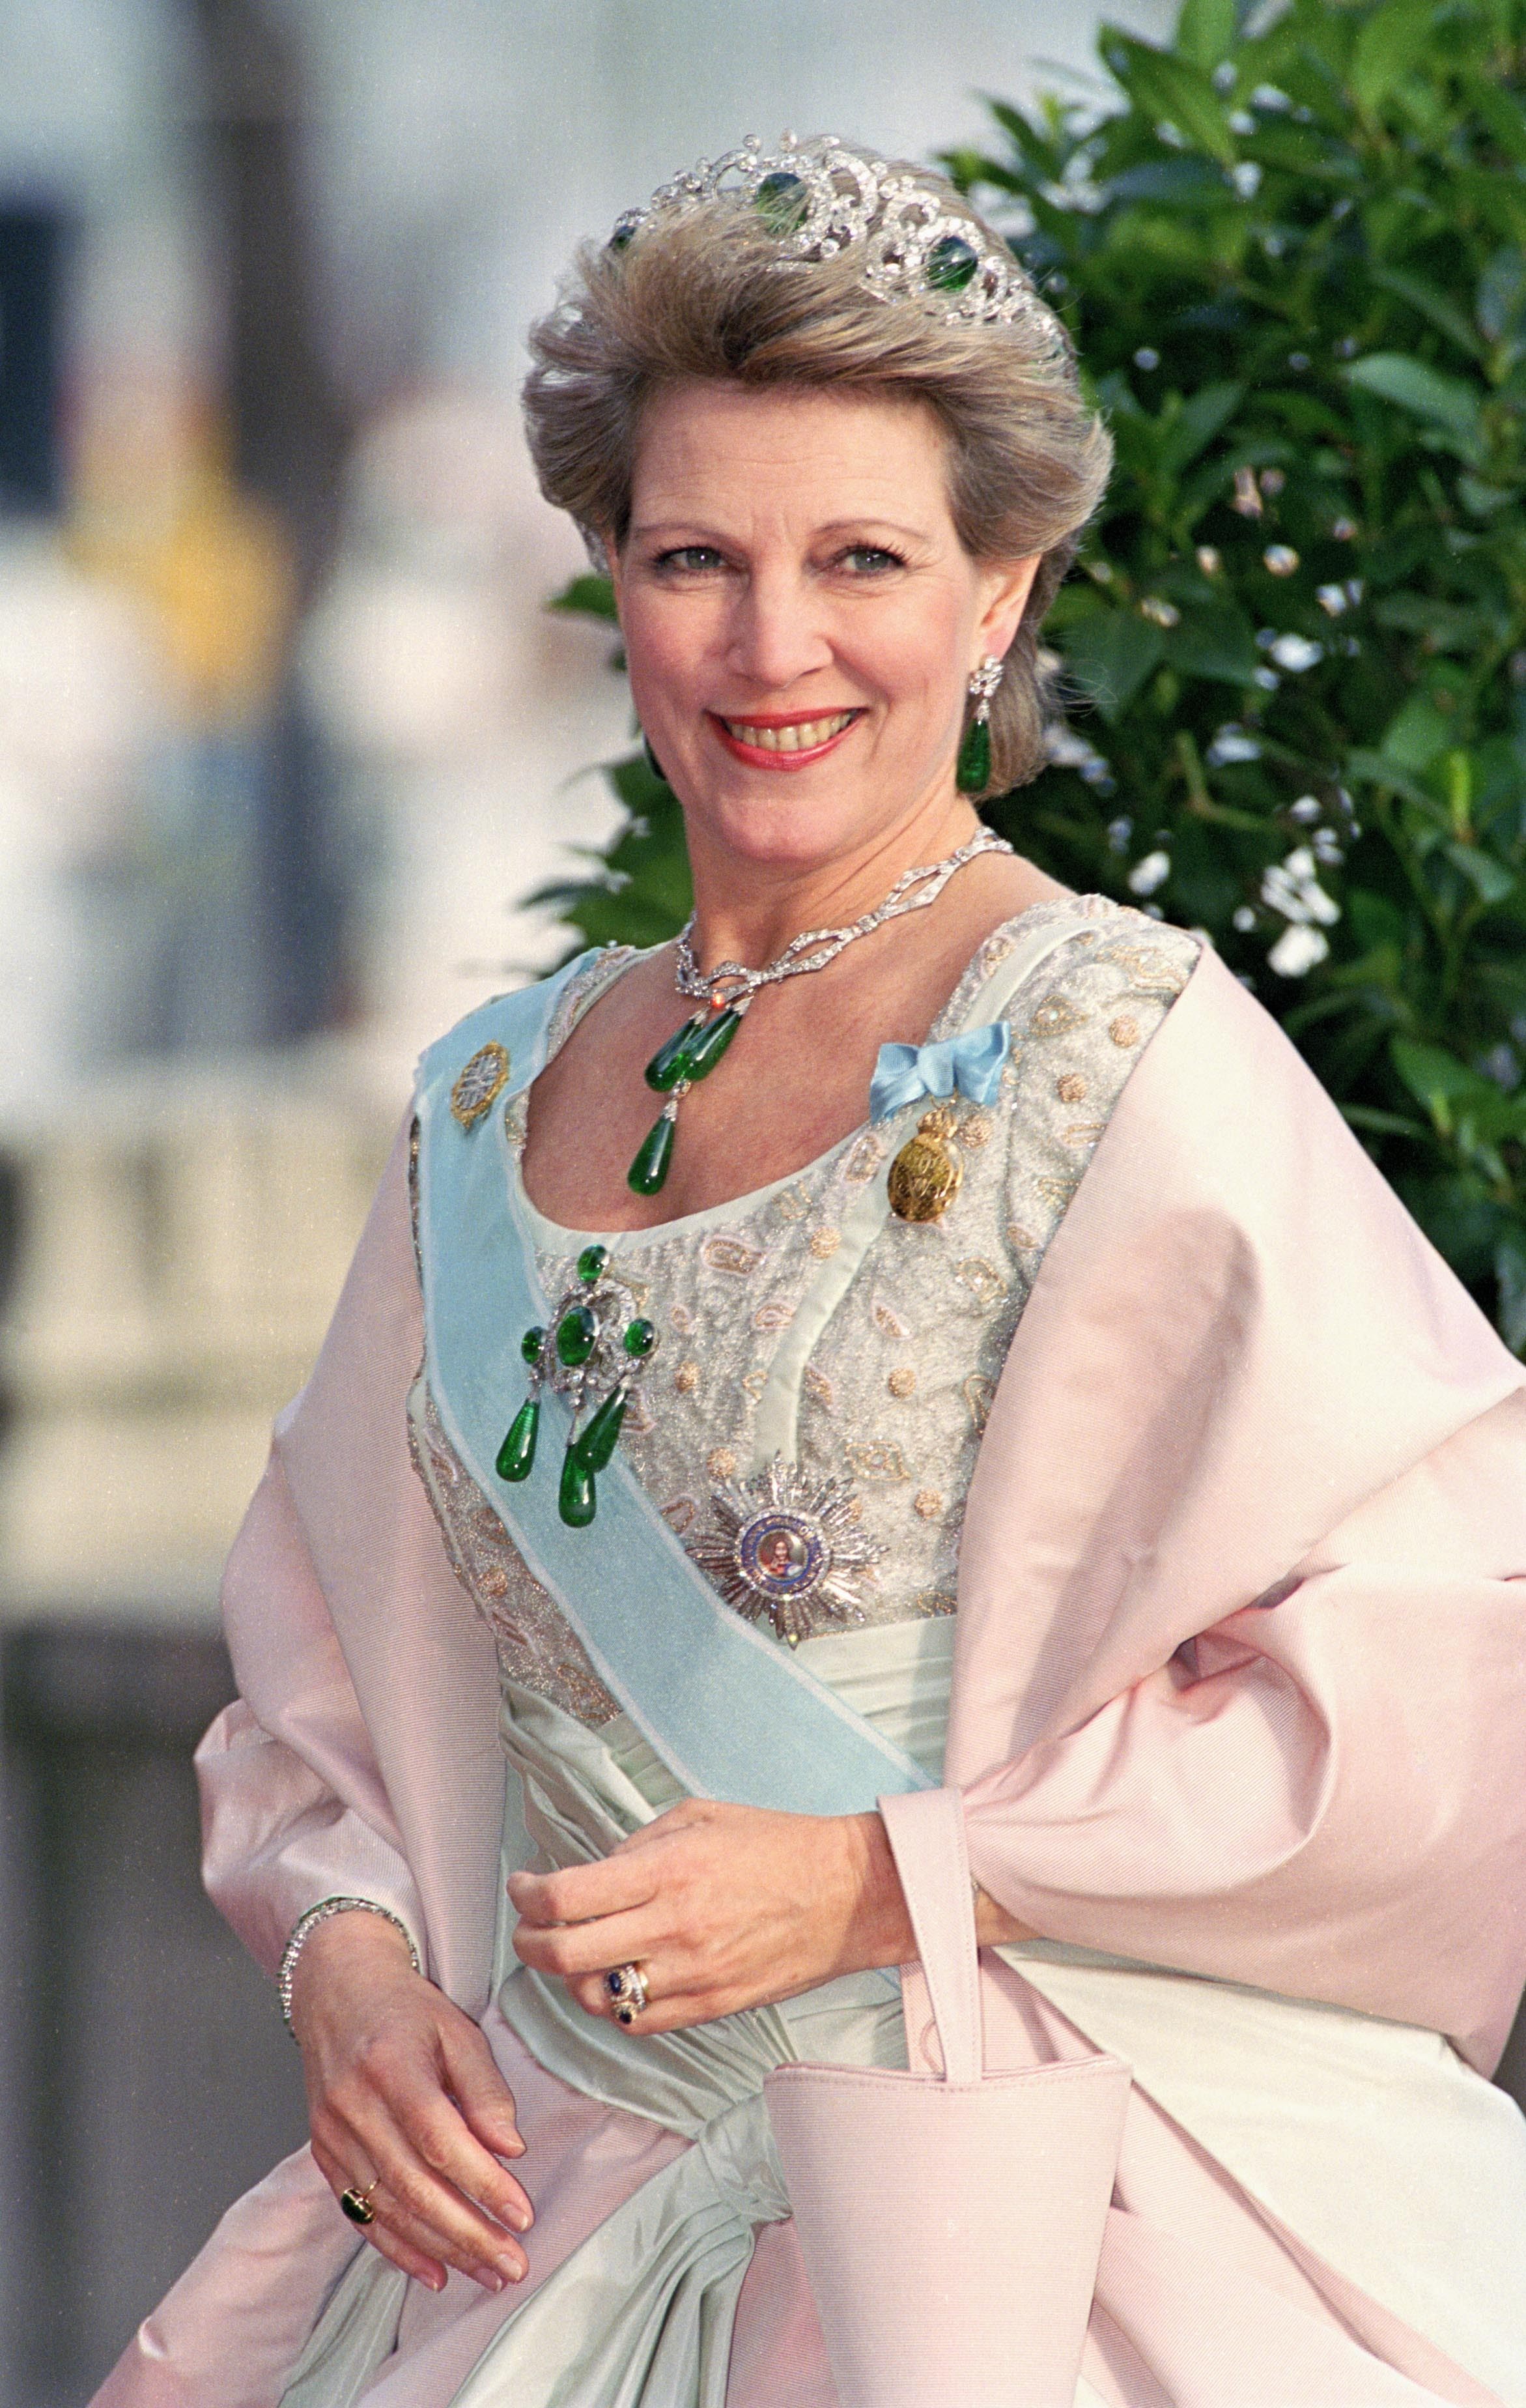 Queen Anne-Marie of Greece wearing the Greek Emerald Parure Tiara. Photo: Getty Images